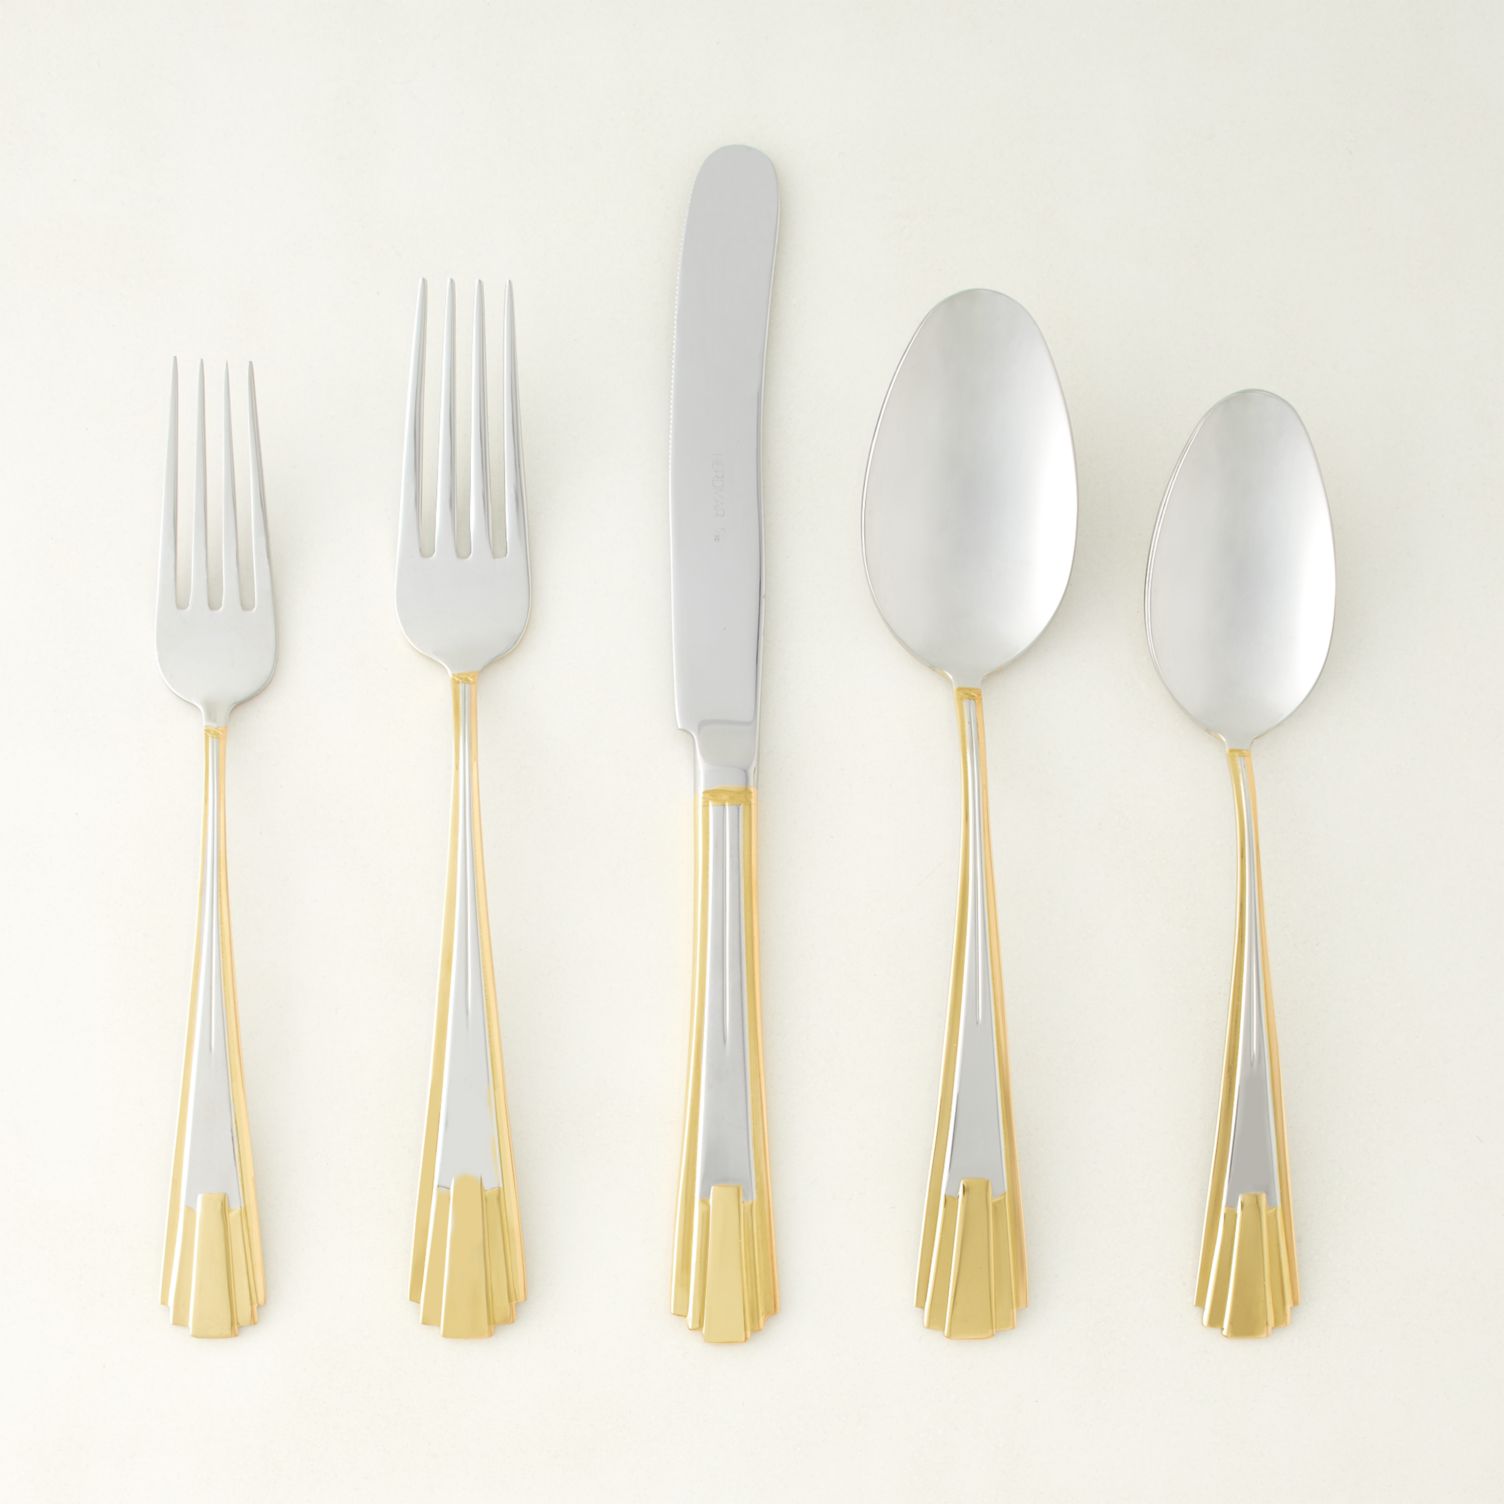 Deco-style flatware with gold detailing